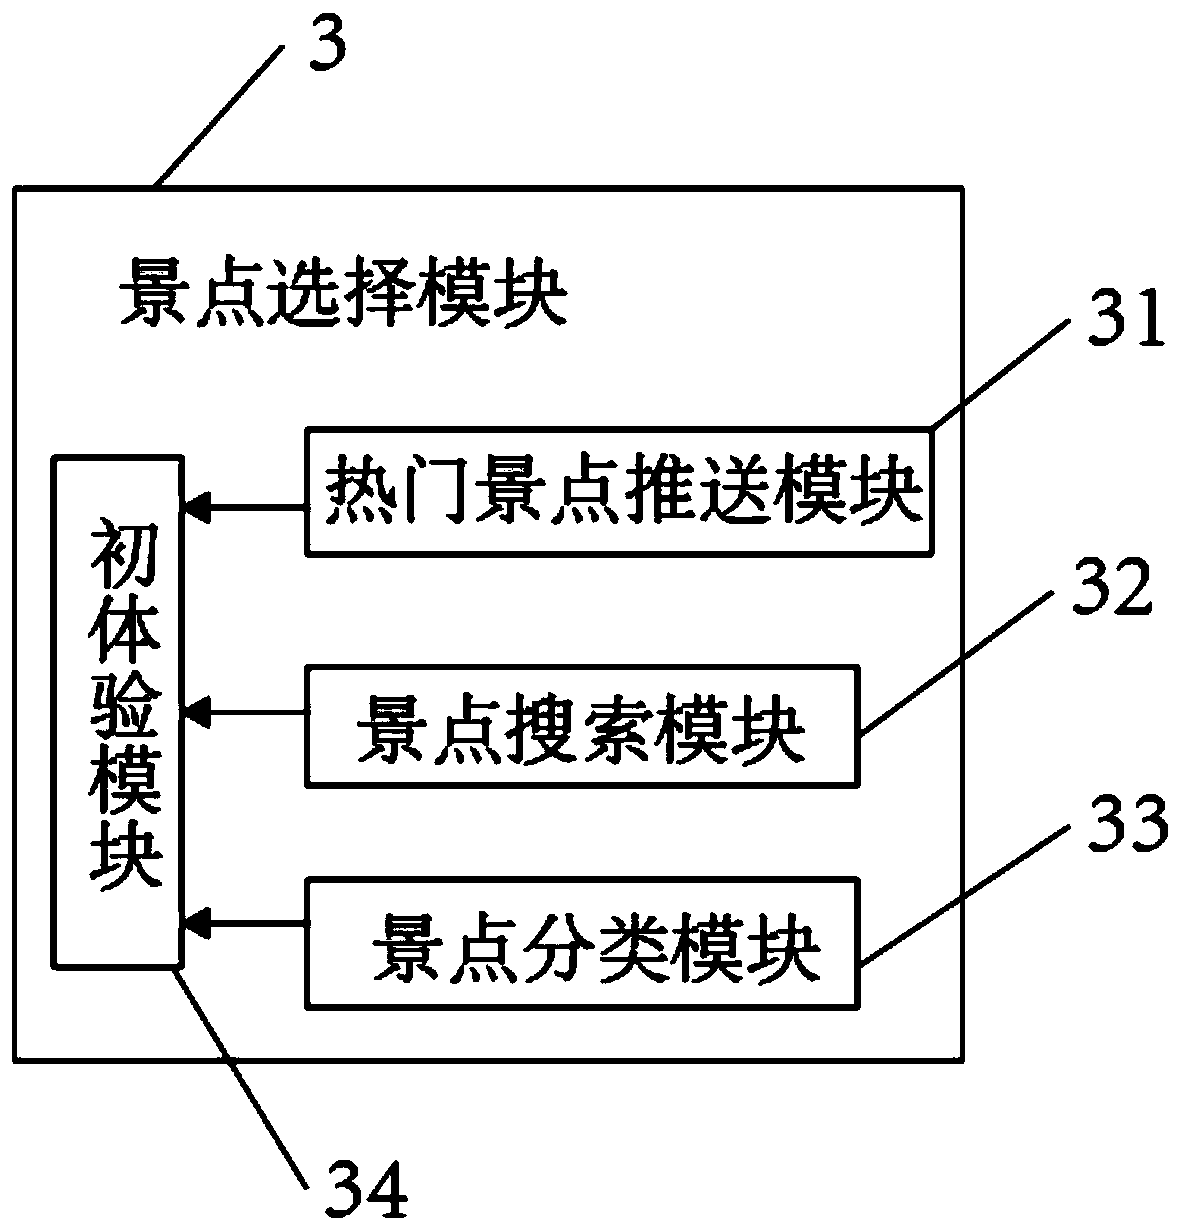 Self-service experience system and method for smart tourism store